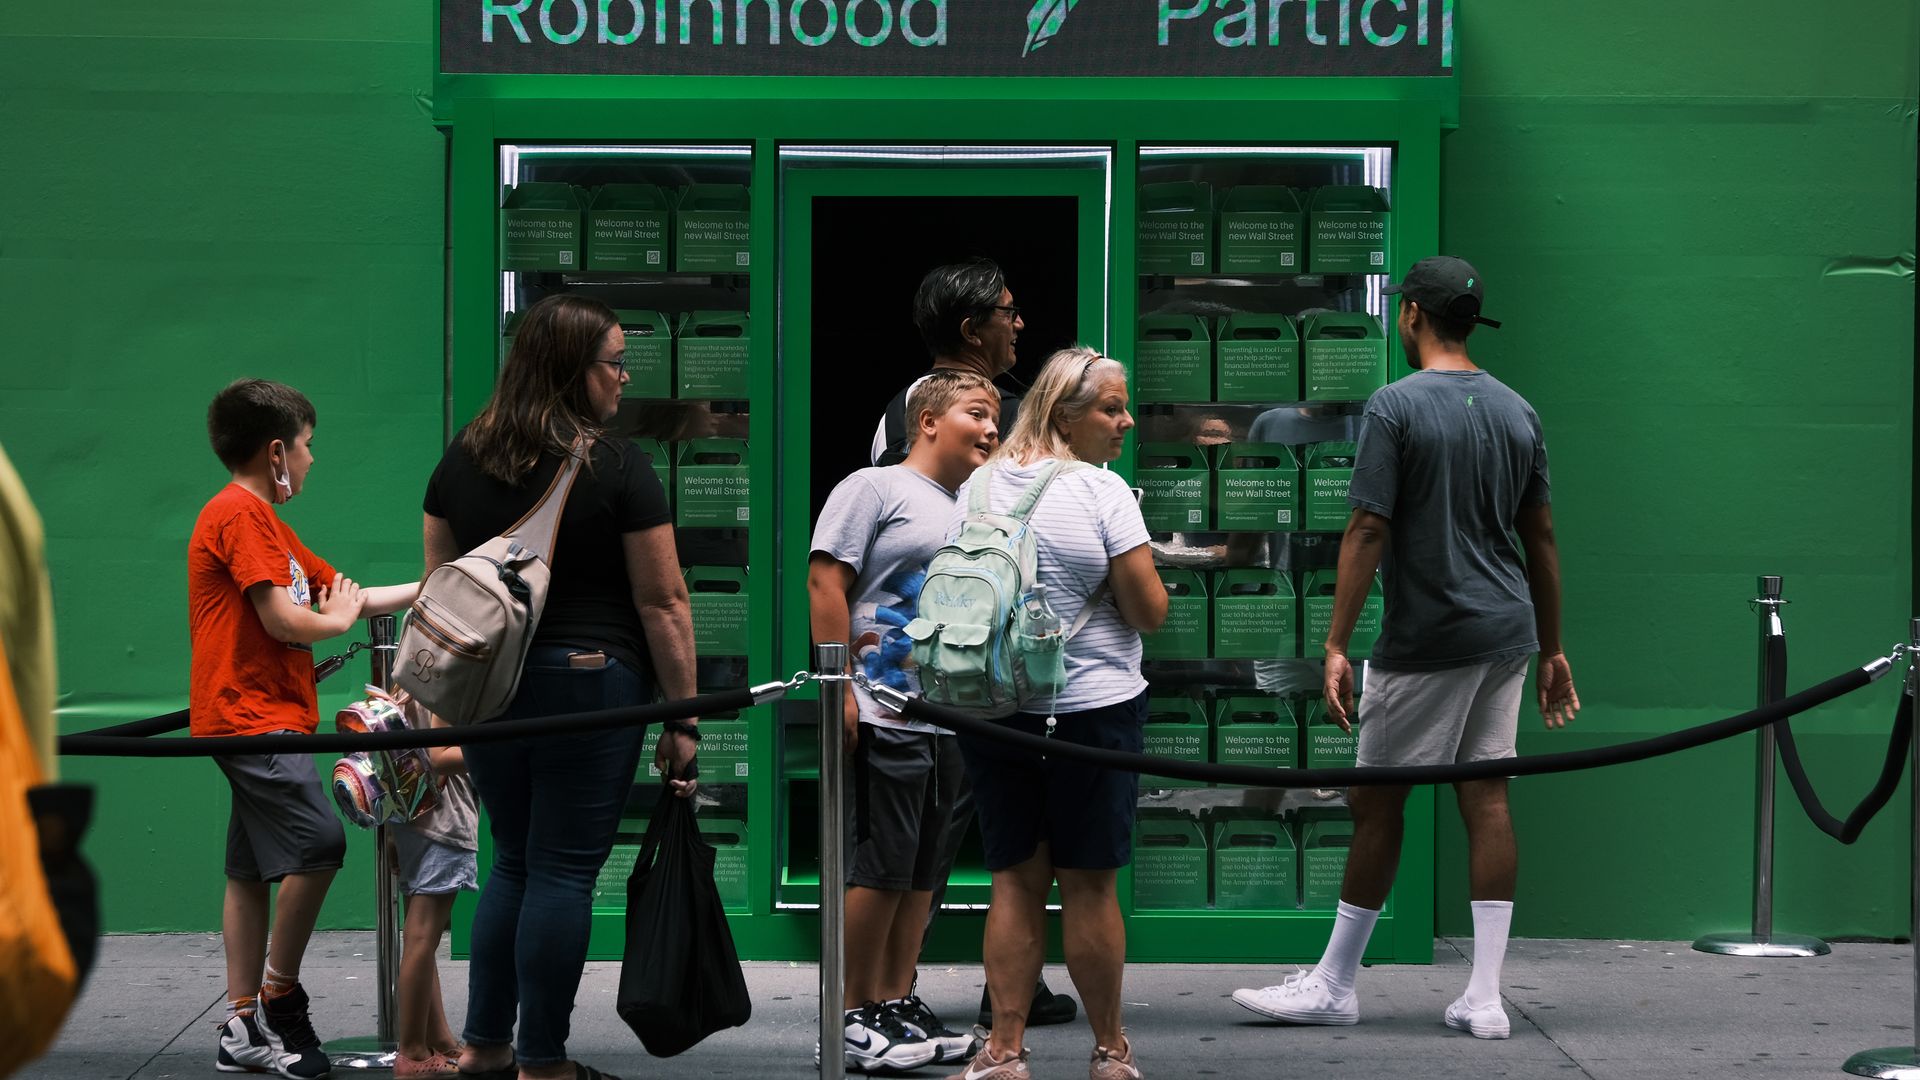 People at a Robinhood kiosk in New York City in July 2021.